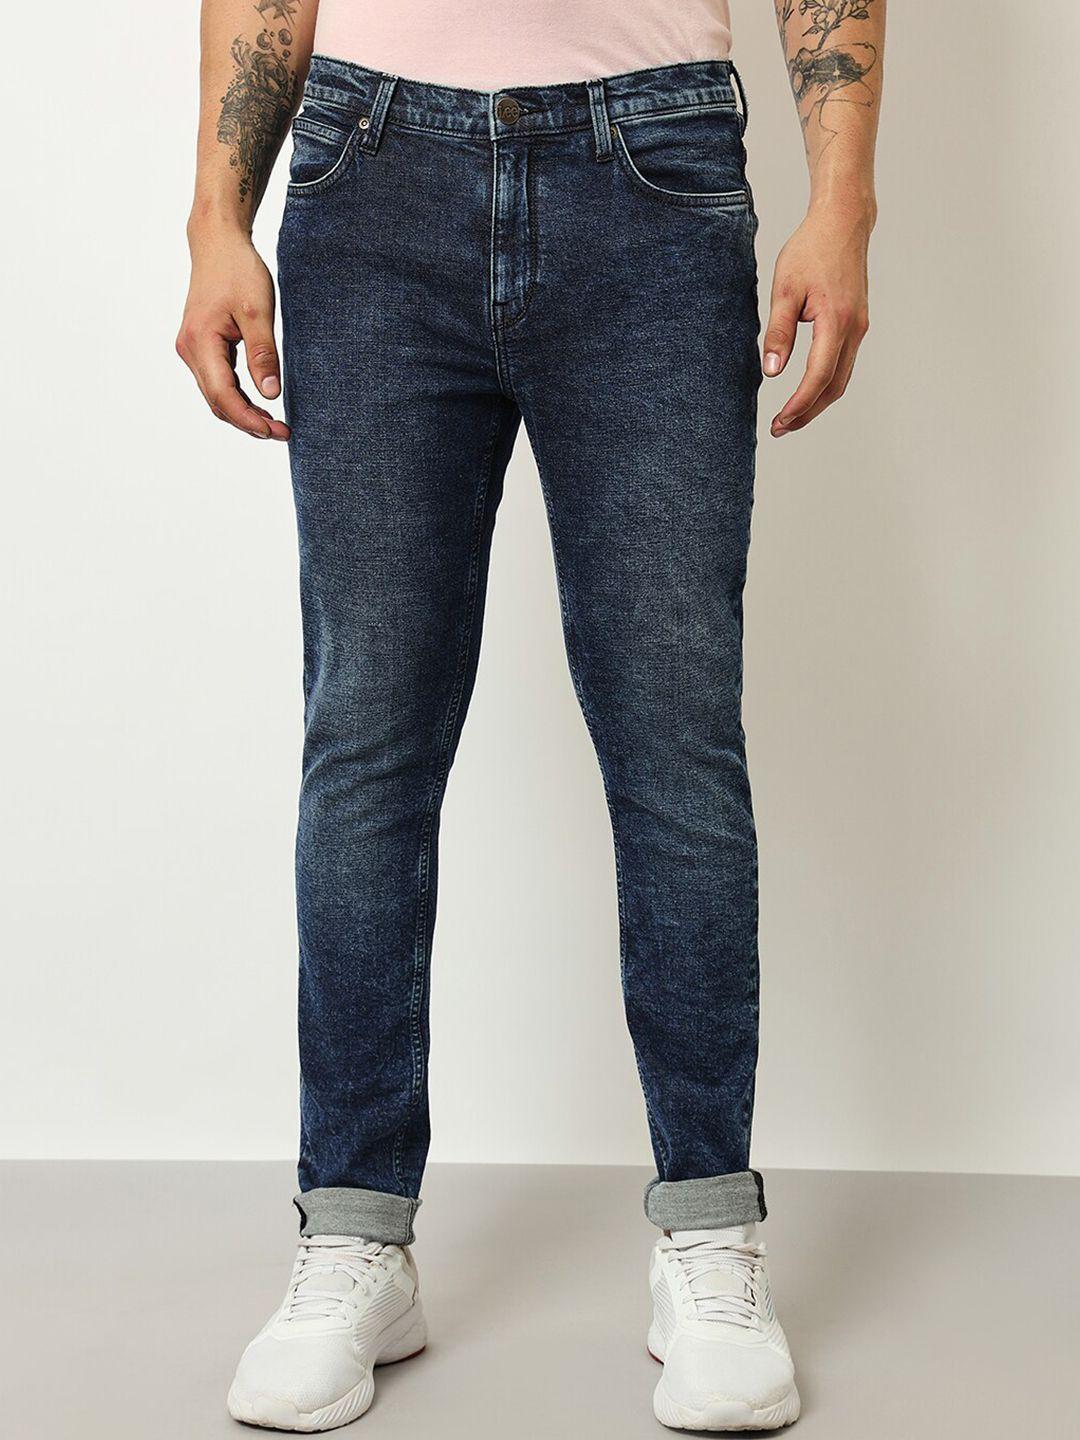 lee-men-bruce-skinny-fit-mid-rise-clean-look-heavy-fade-stretchable-jeans